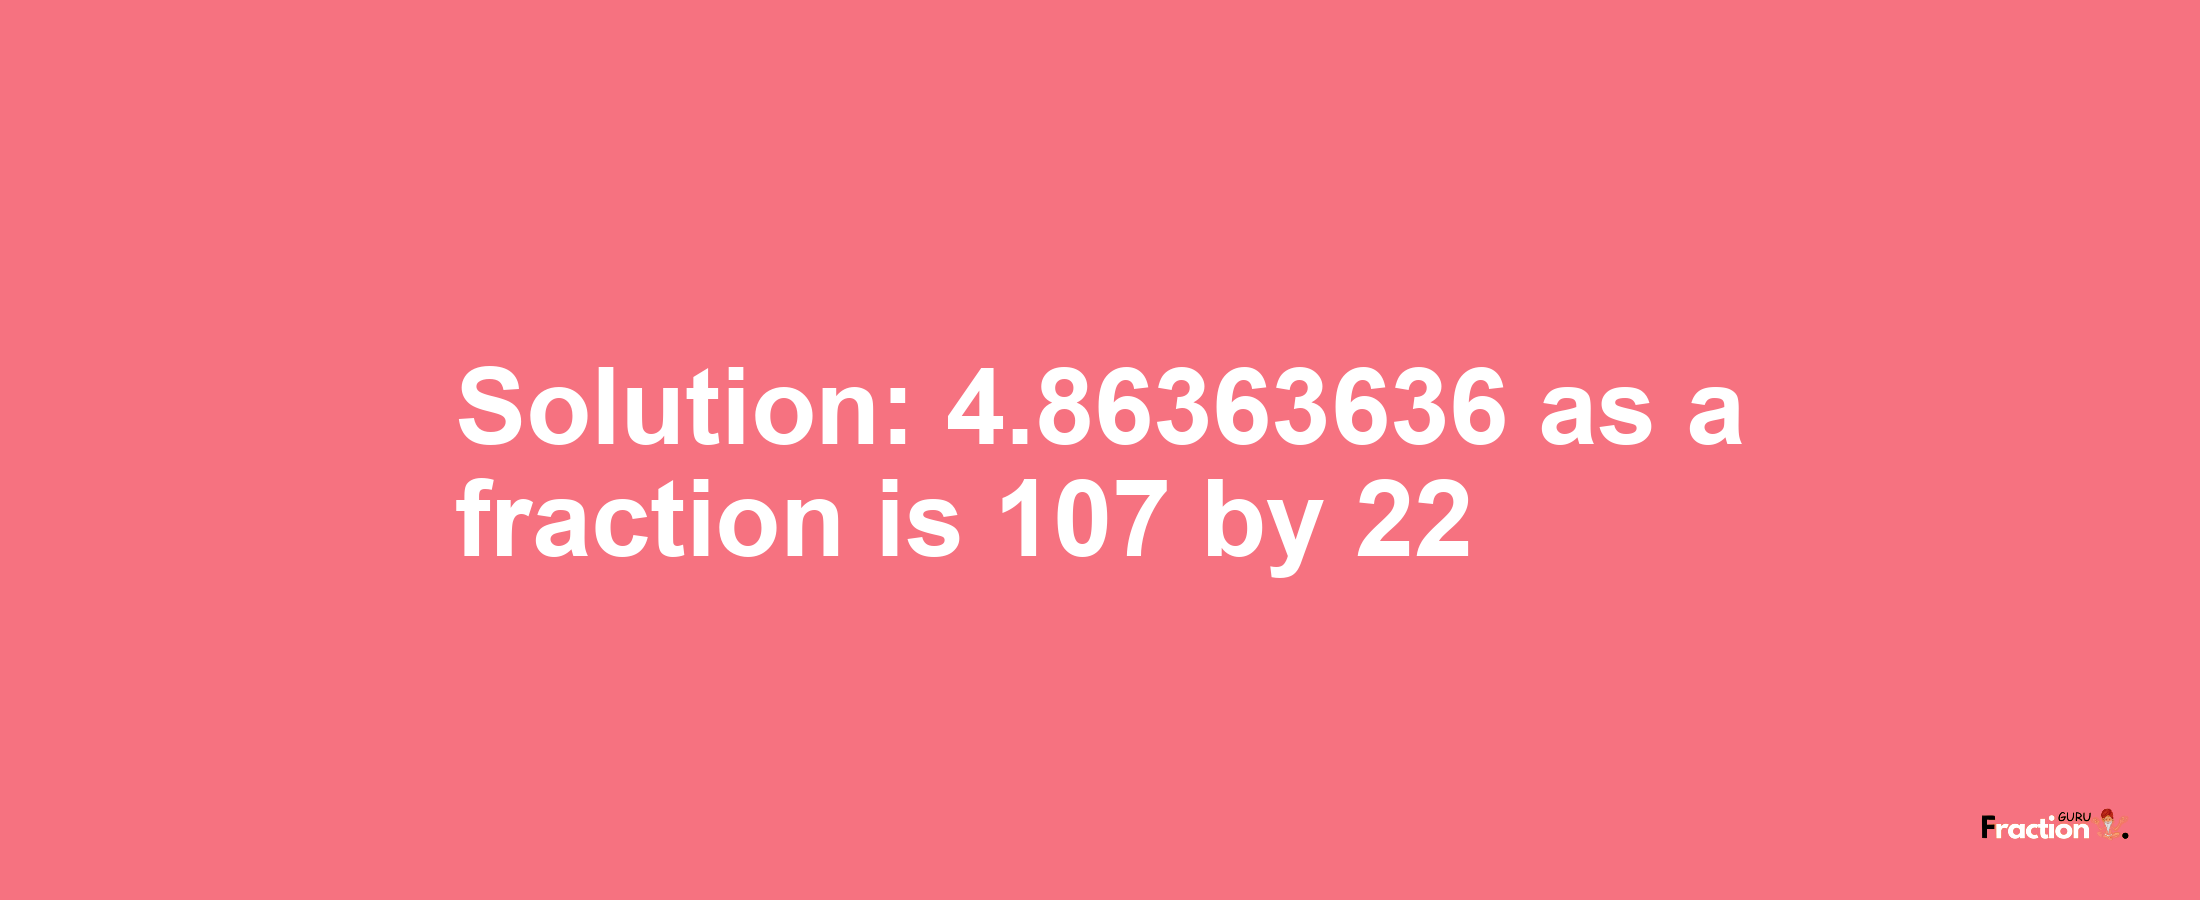 Solution:4.86363636 as a fraction is 107/22